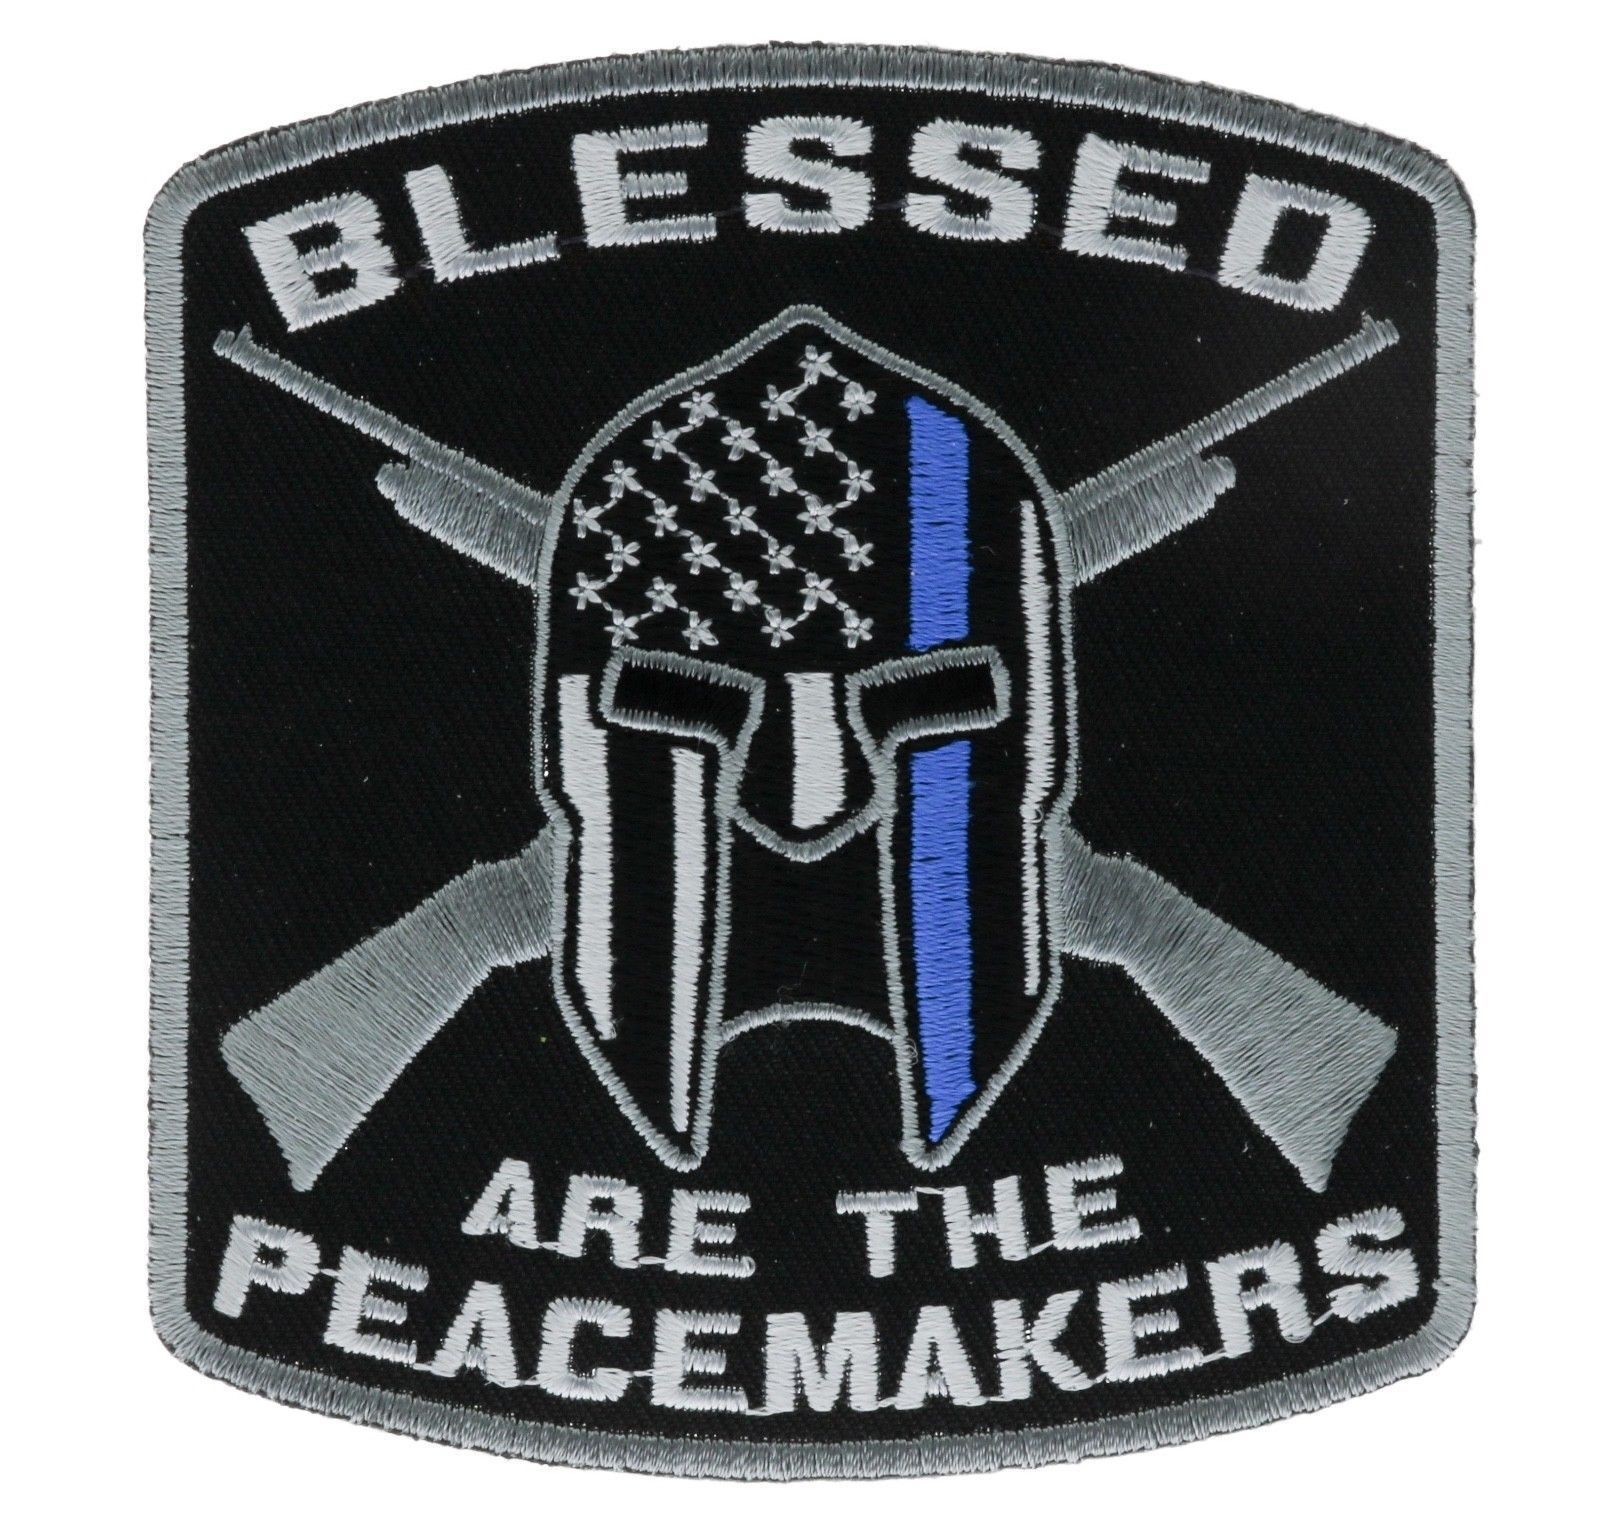 Blessed Peacemakers Thin Blue Line Law Enforcement 4 inch Patch IVAN4622 F1D6E